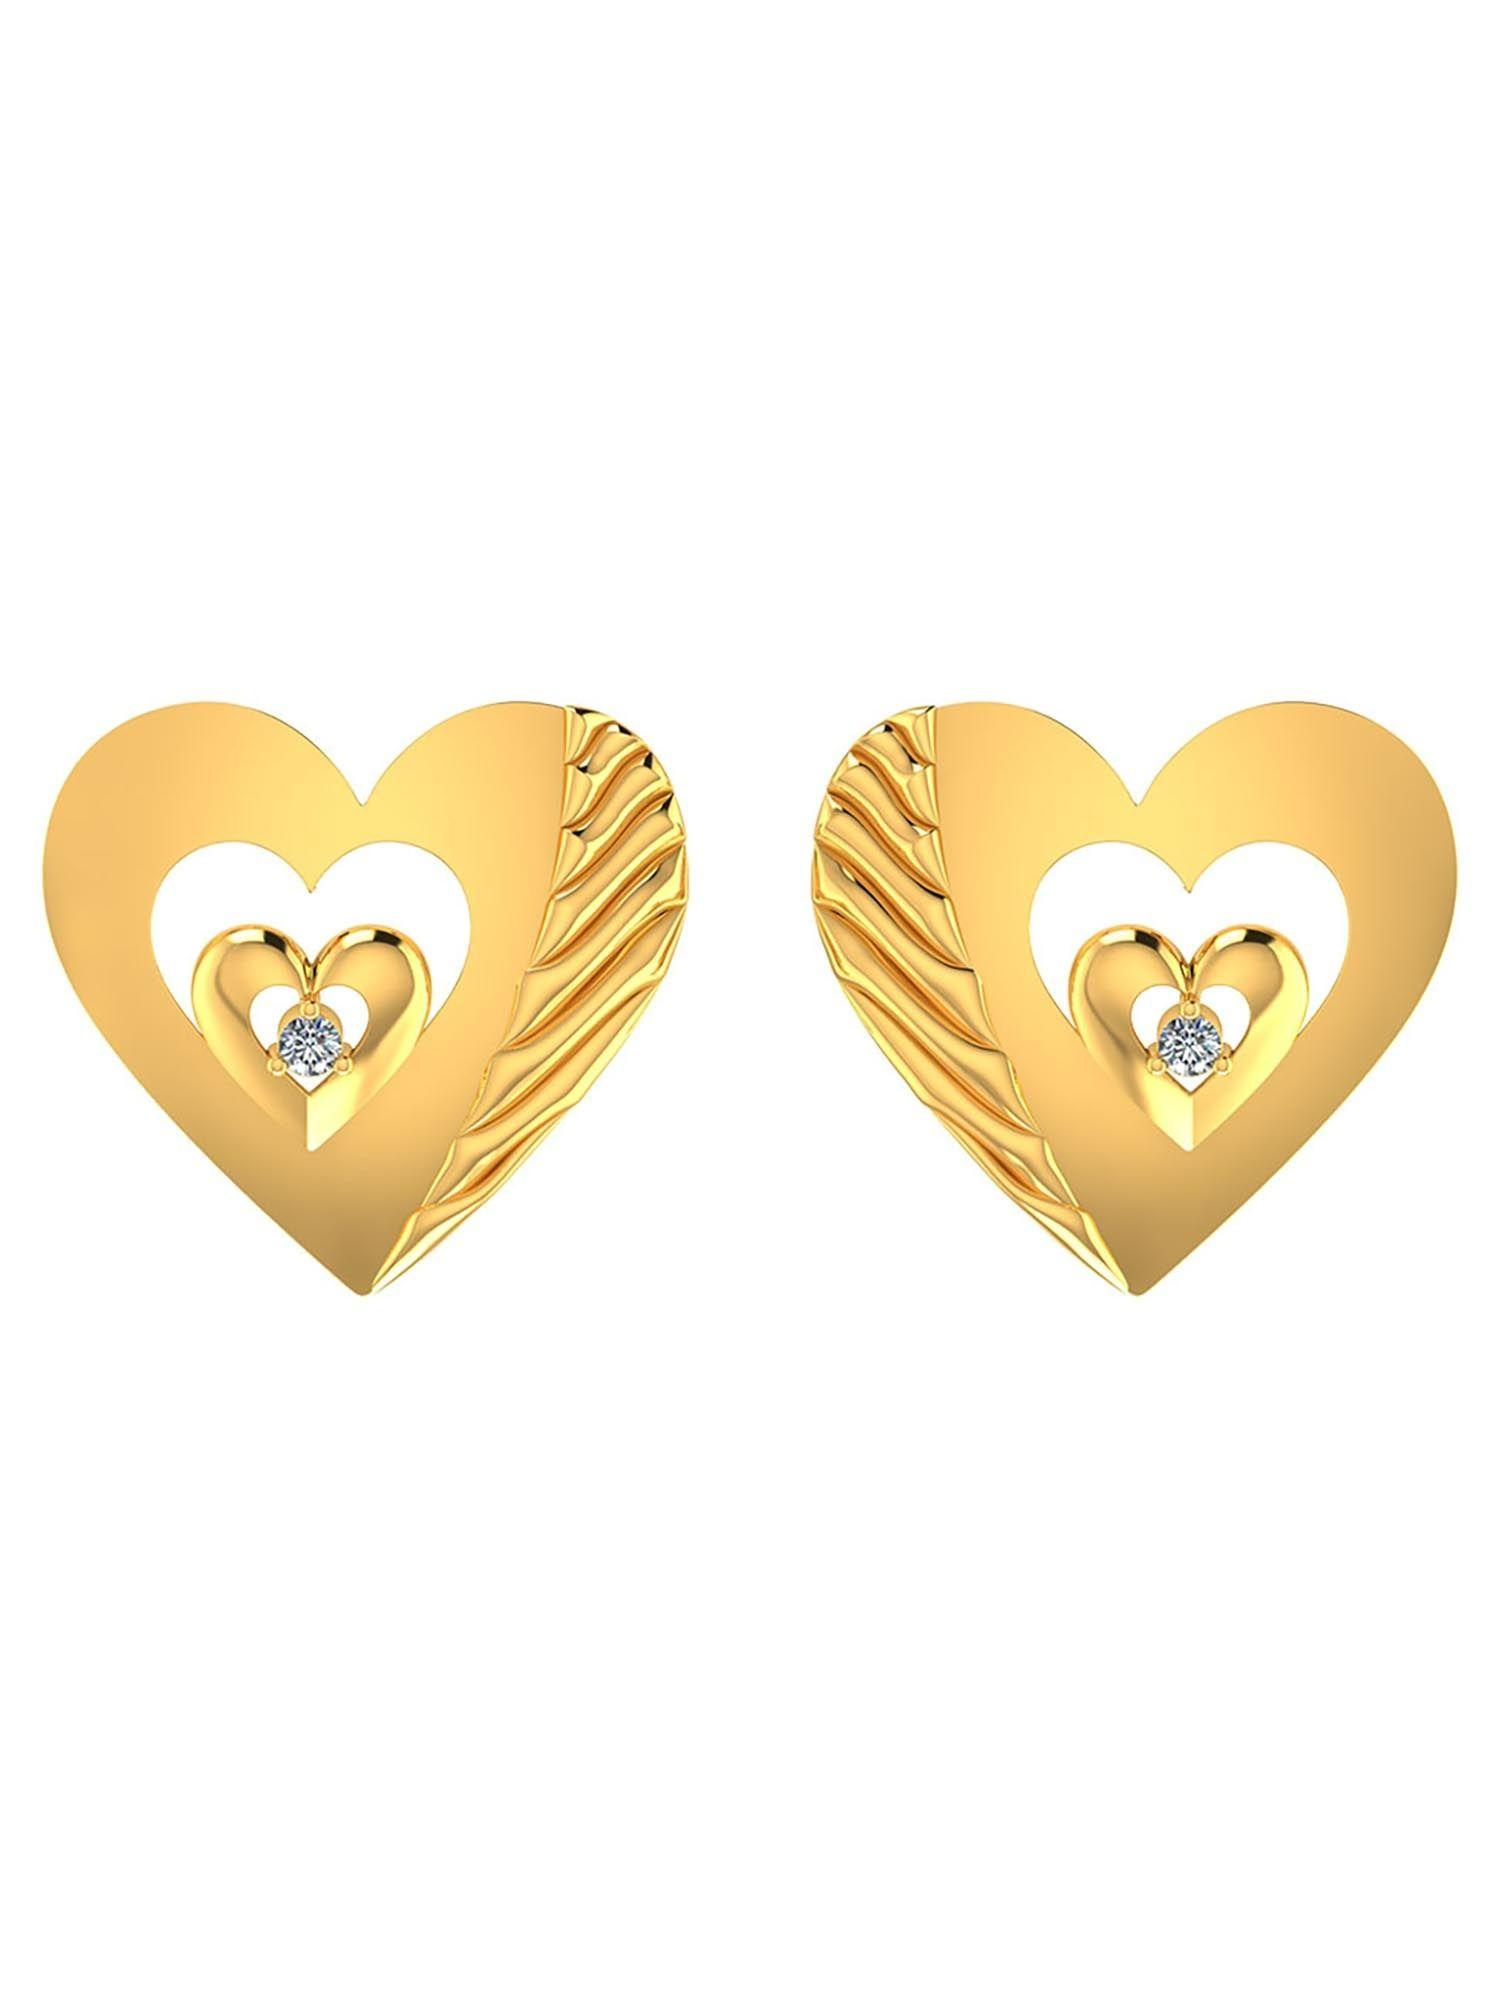 plaid-heart-stud-earrings-with-gold-screw